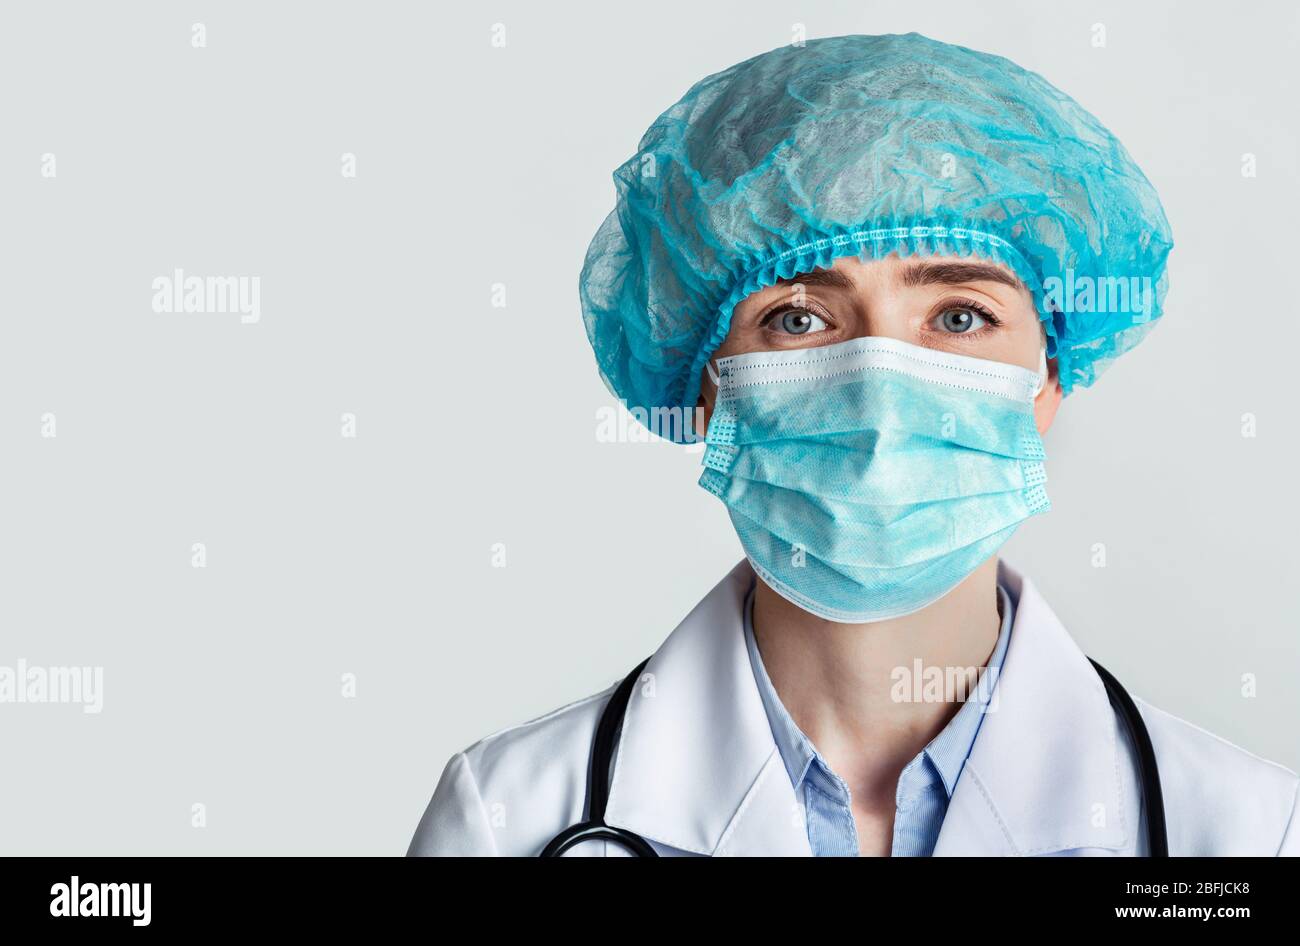 Therapist in protective mask and cap with stethoscope Stock Photo